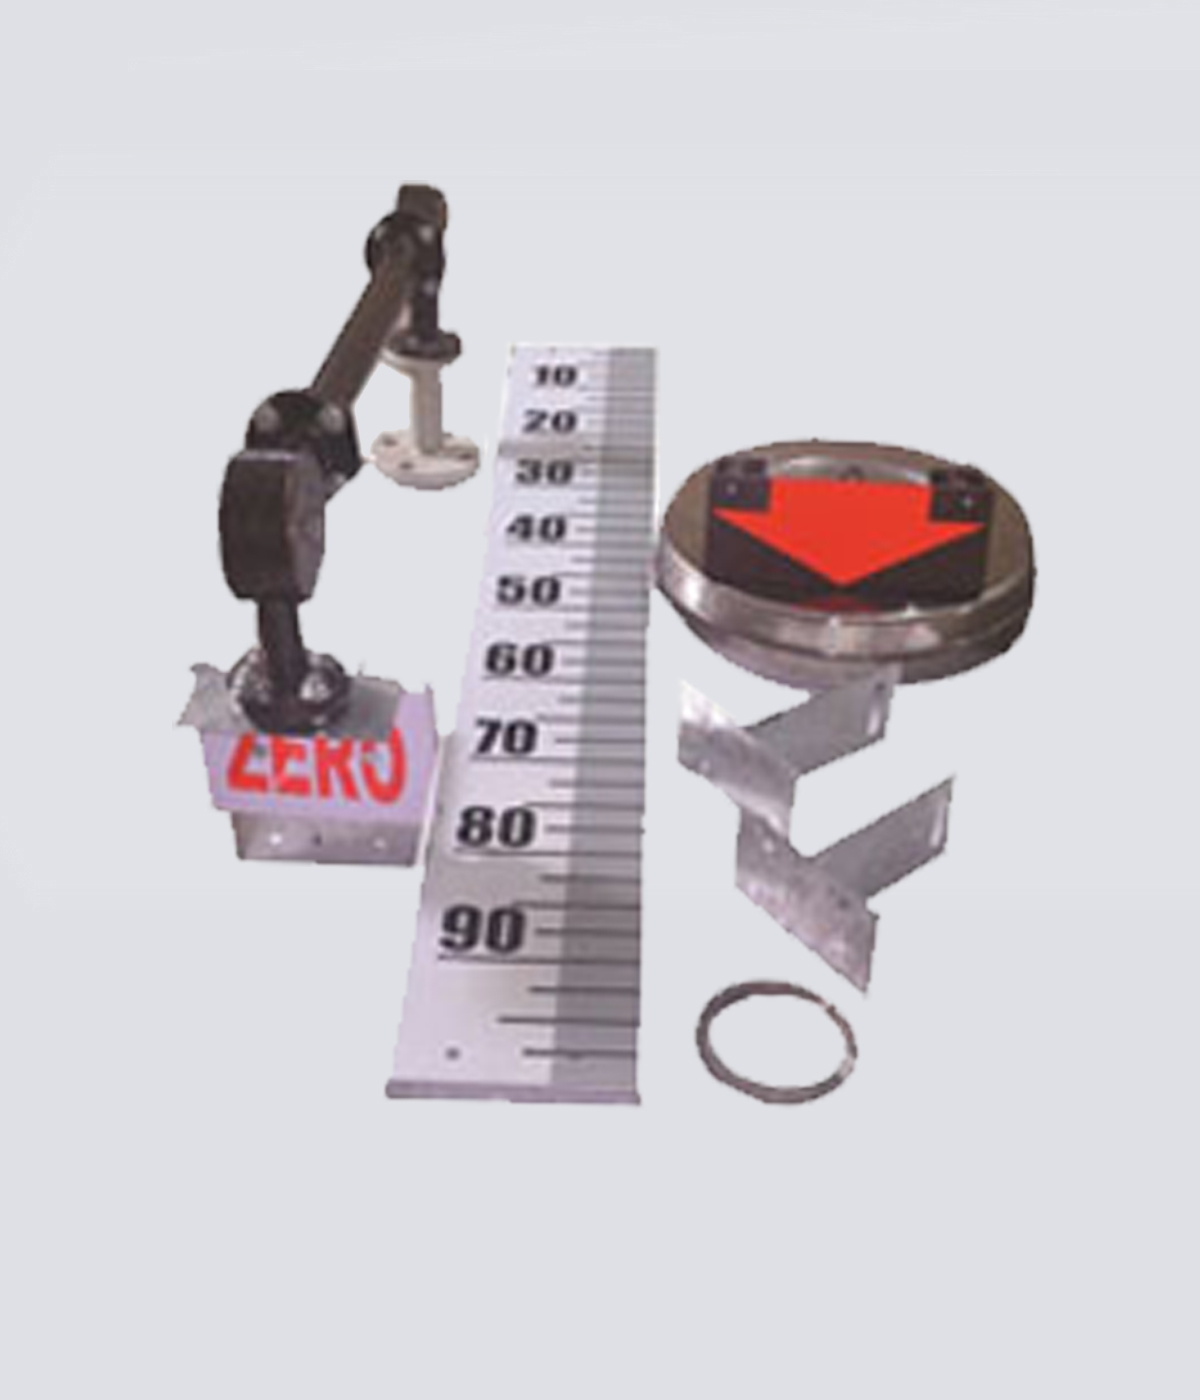 float-&-board-guided-type-level-gauges